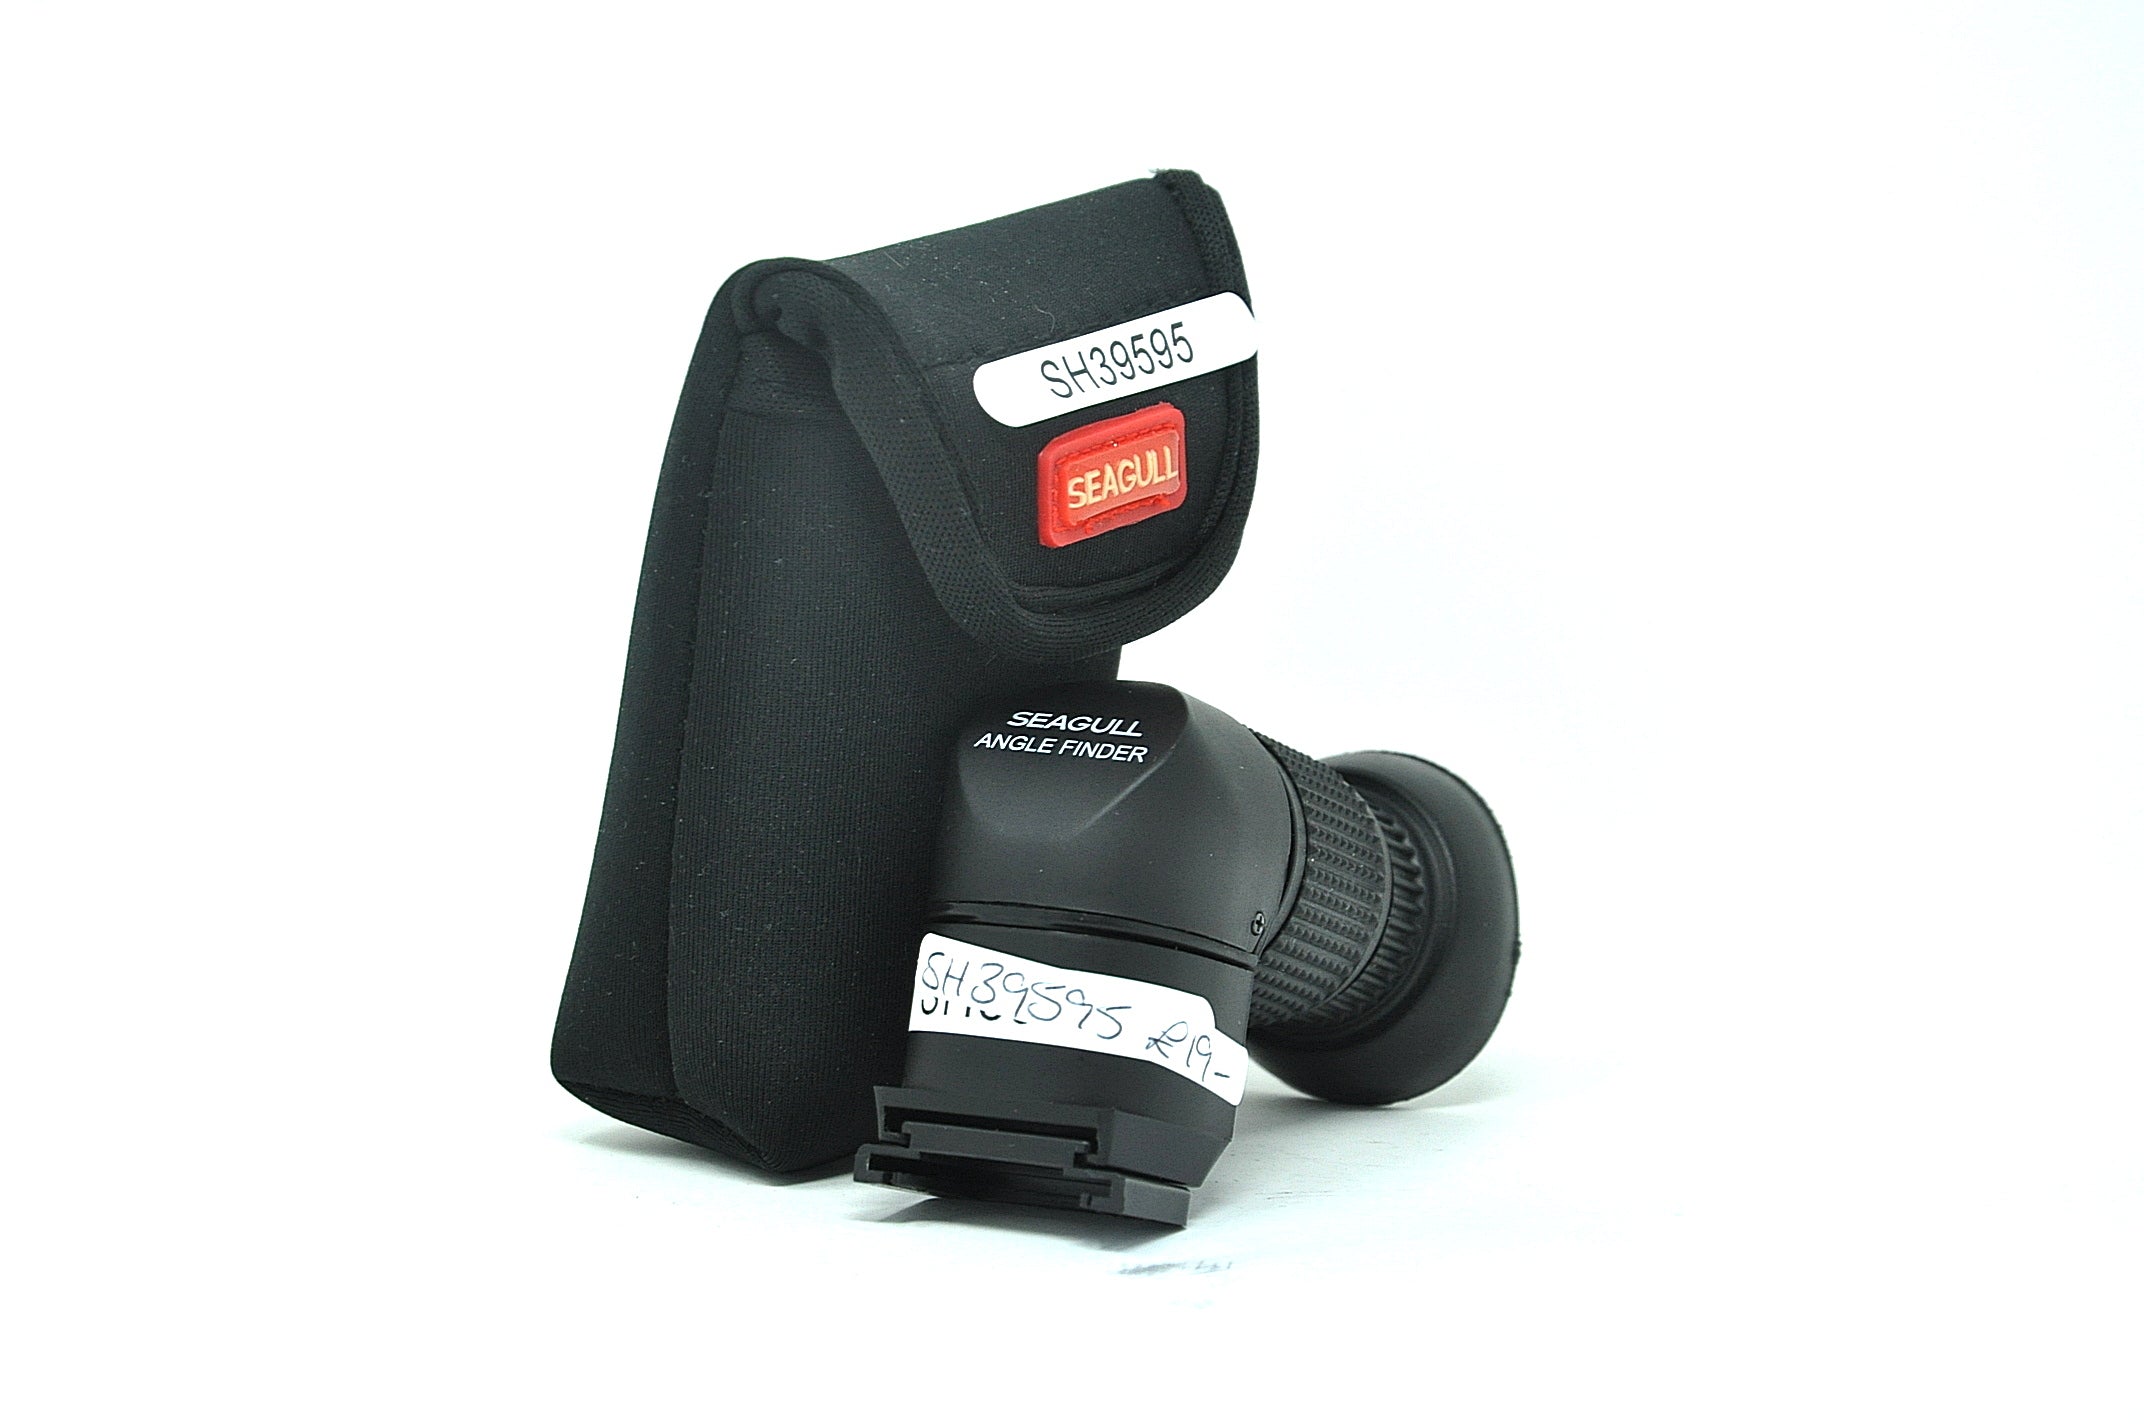 Used Seagull Right angled Finder 1x-2x Canon APS-C DSLRS (SH39595)